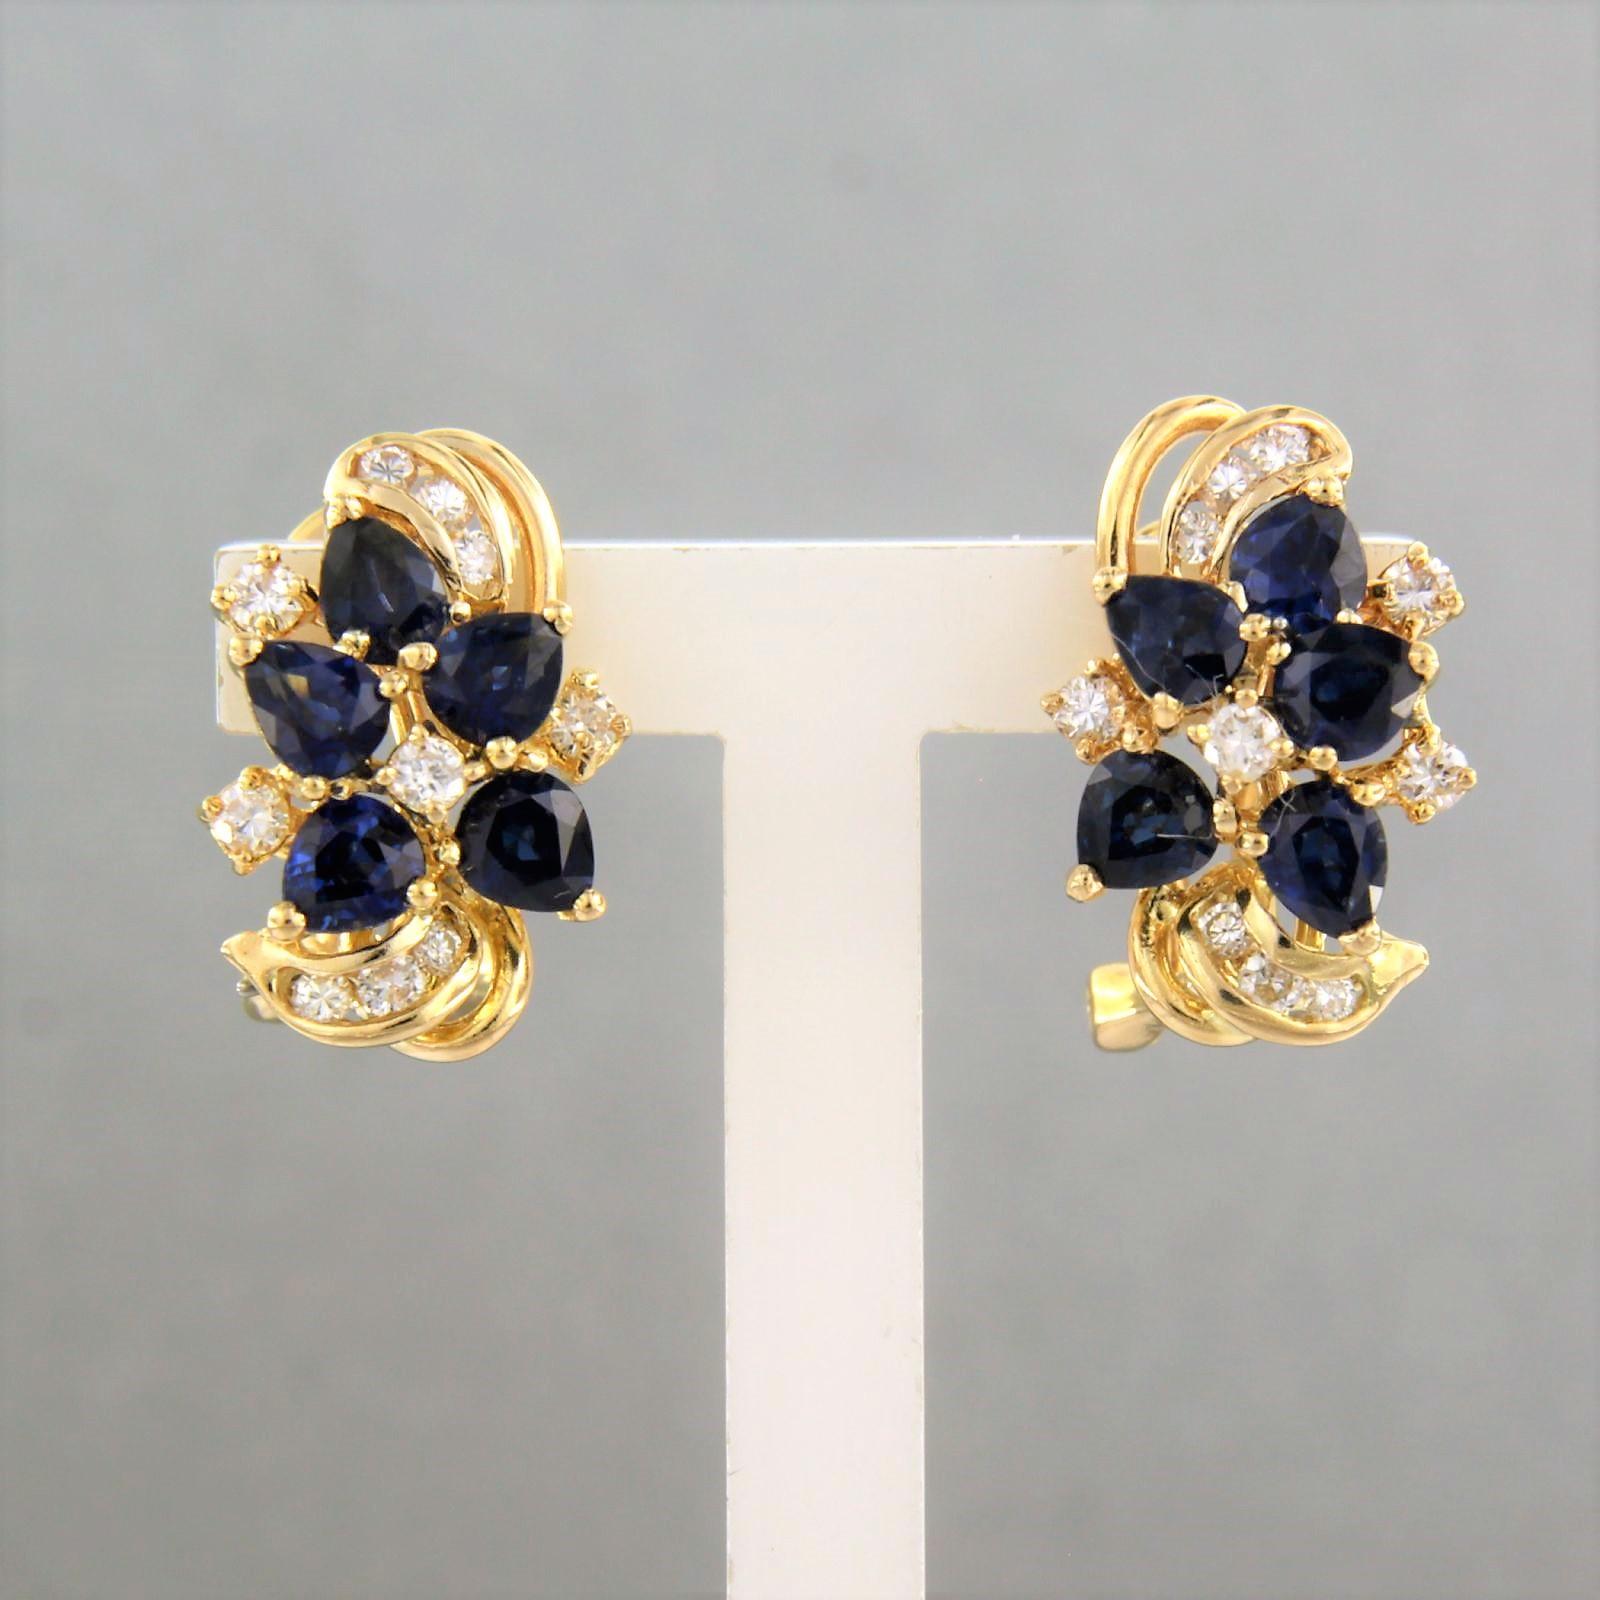 18k gold clip-on earrings set with 1.50ct sapphire and brilliant cut diamonds up to. 0.40ct - F/G - VS/SI

detailed description:

the front of the ear clip is 1.5 cm long by 1.1 cm wide

weight 6.3 grams

set with

- 10 x 3.8 mm x 3.0 mm drop shape